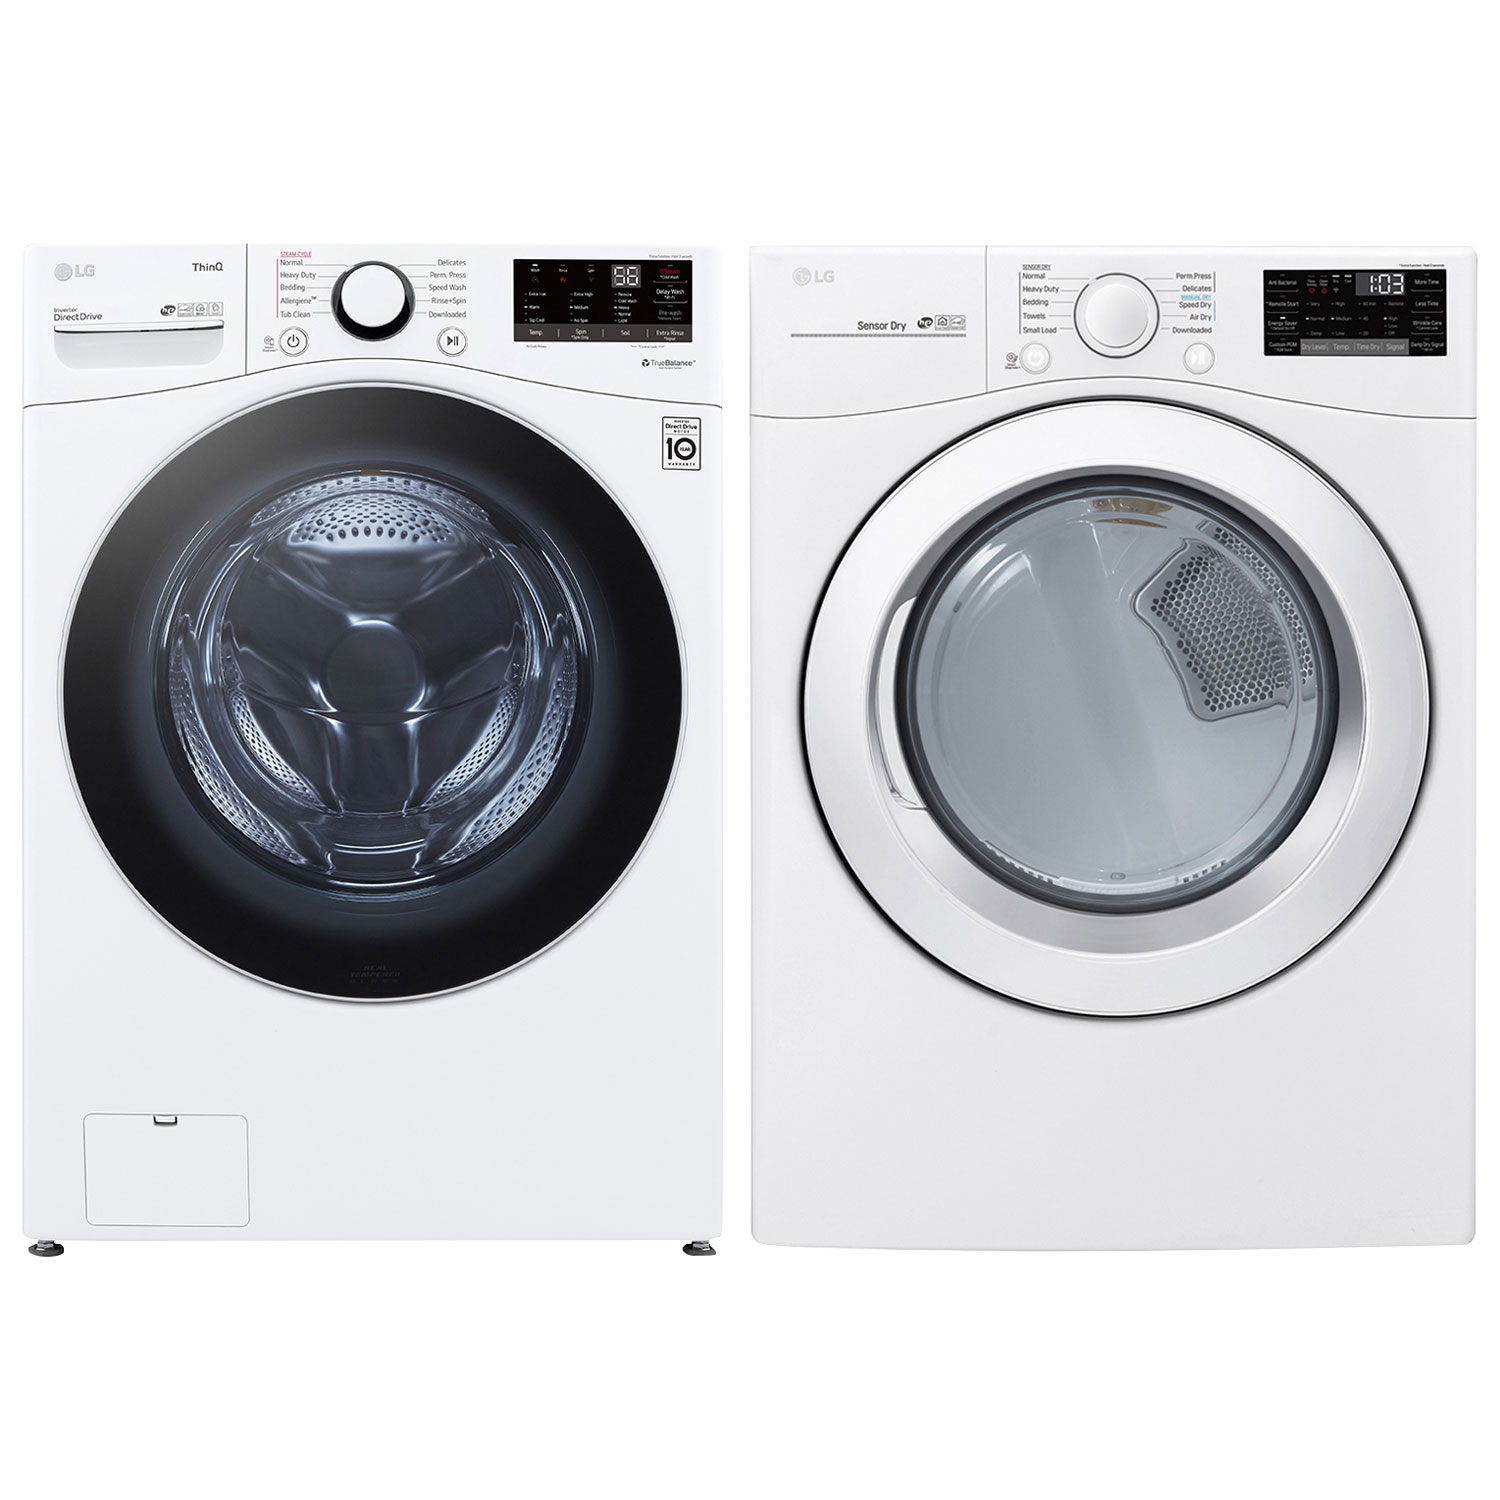 uCreate: May 2017  Laundry pair, Front load washer, Lg washer and dryer